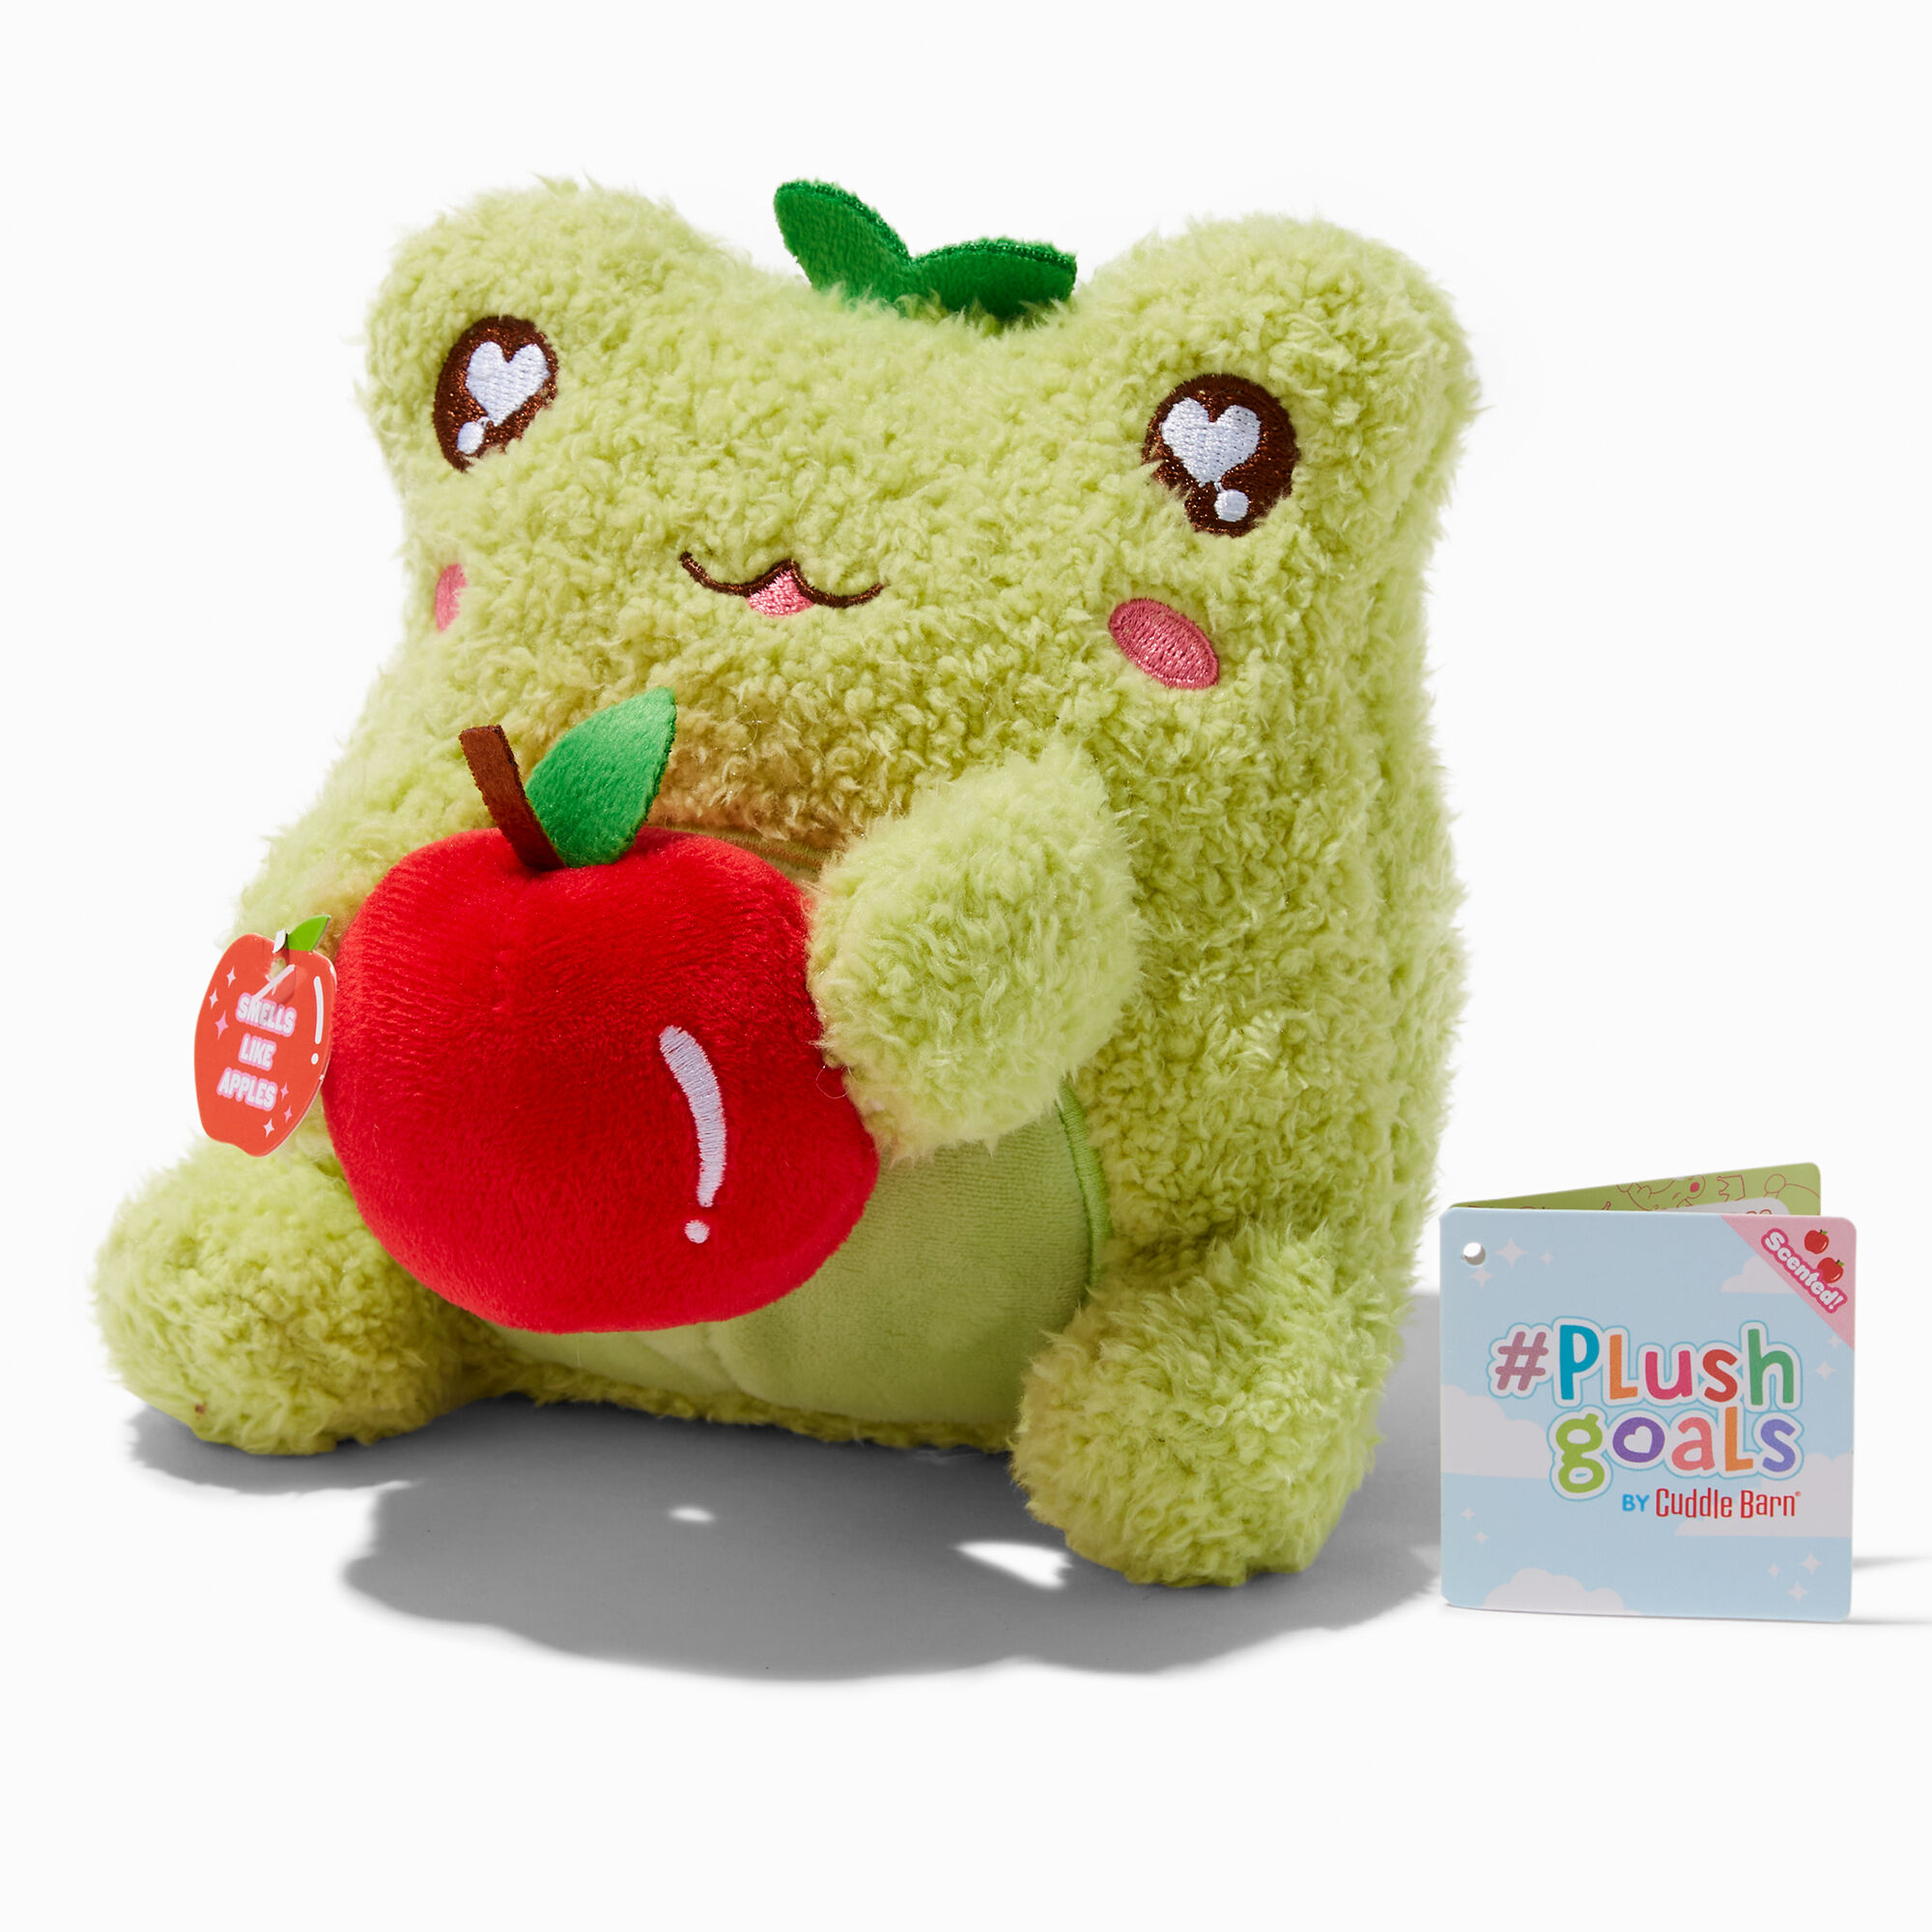 View Claires plush Goals By Cuddle Barn 8 Small Apple Wawa Plush Toy information